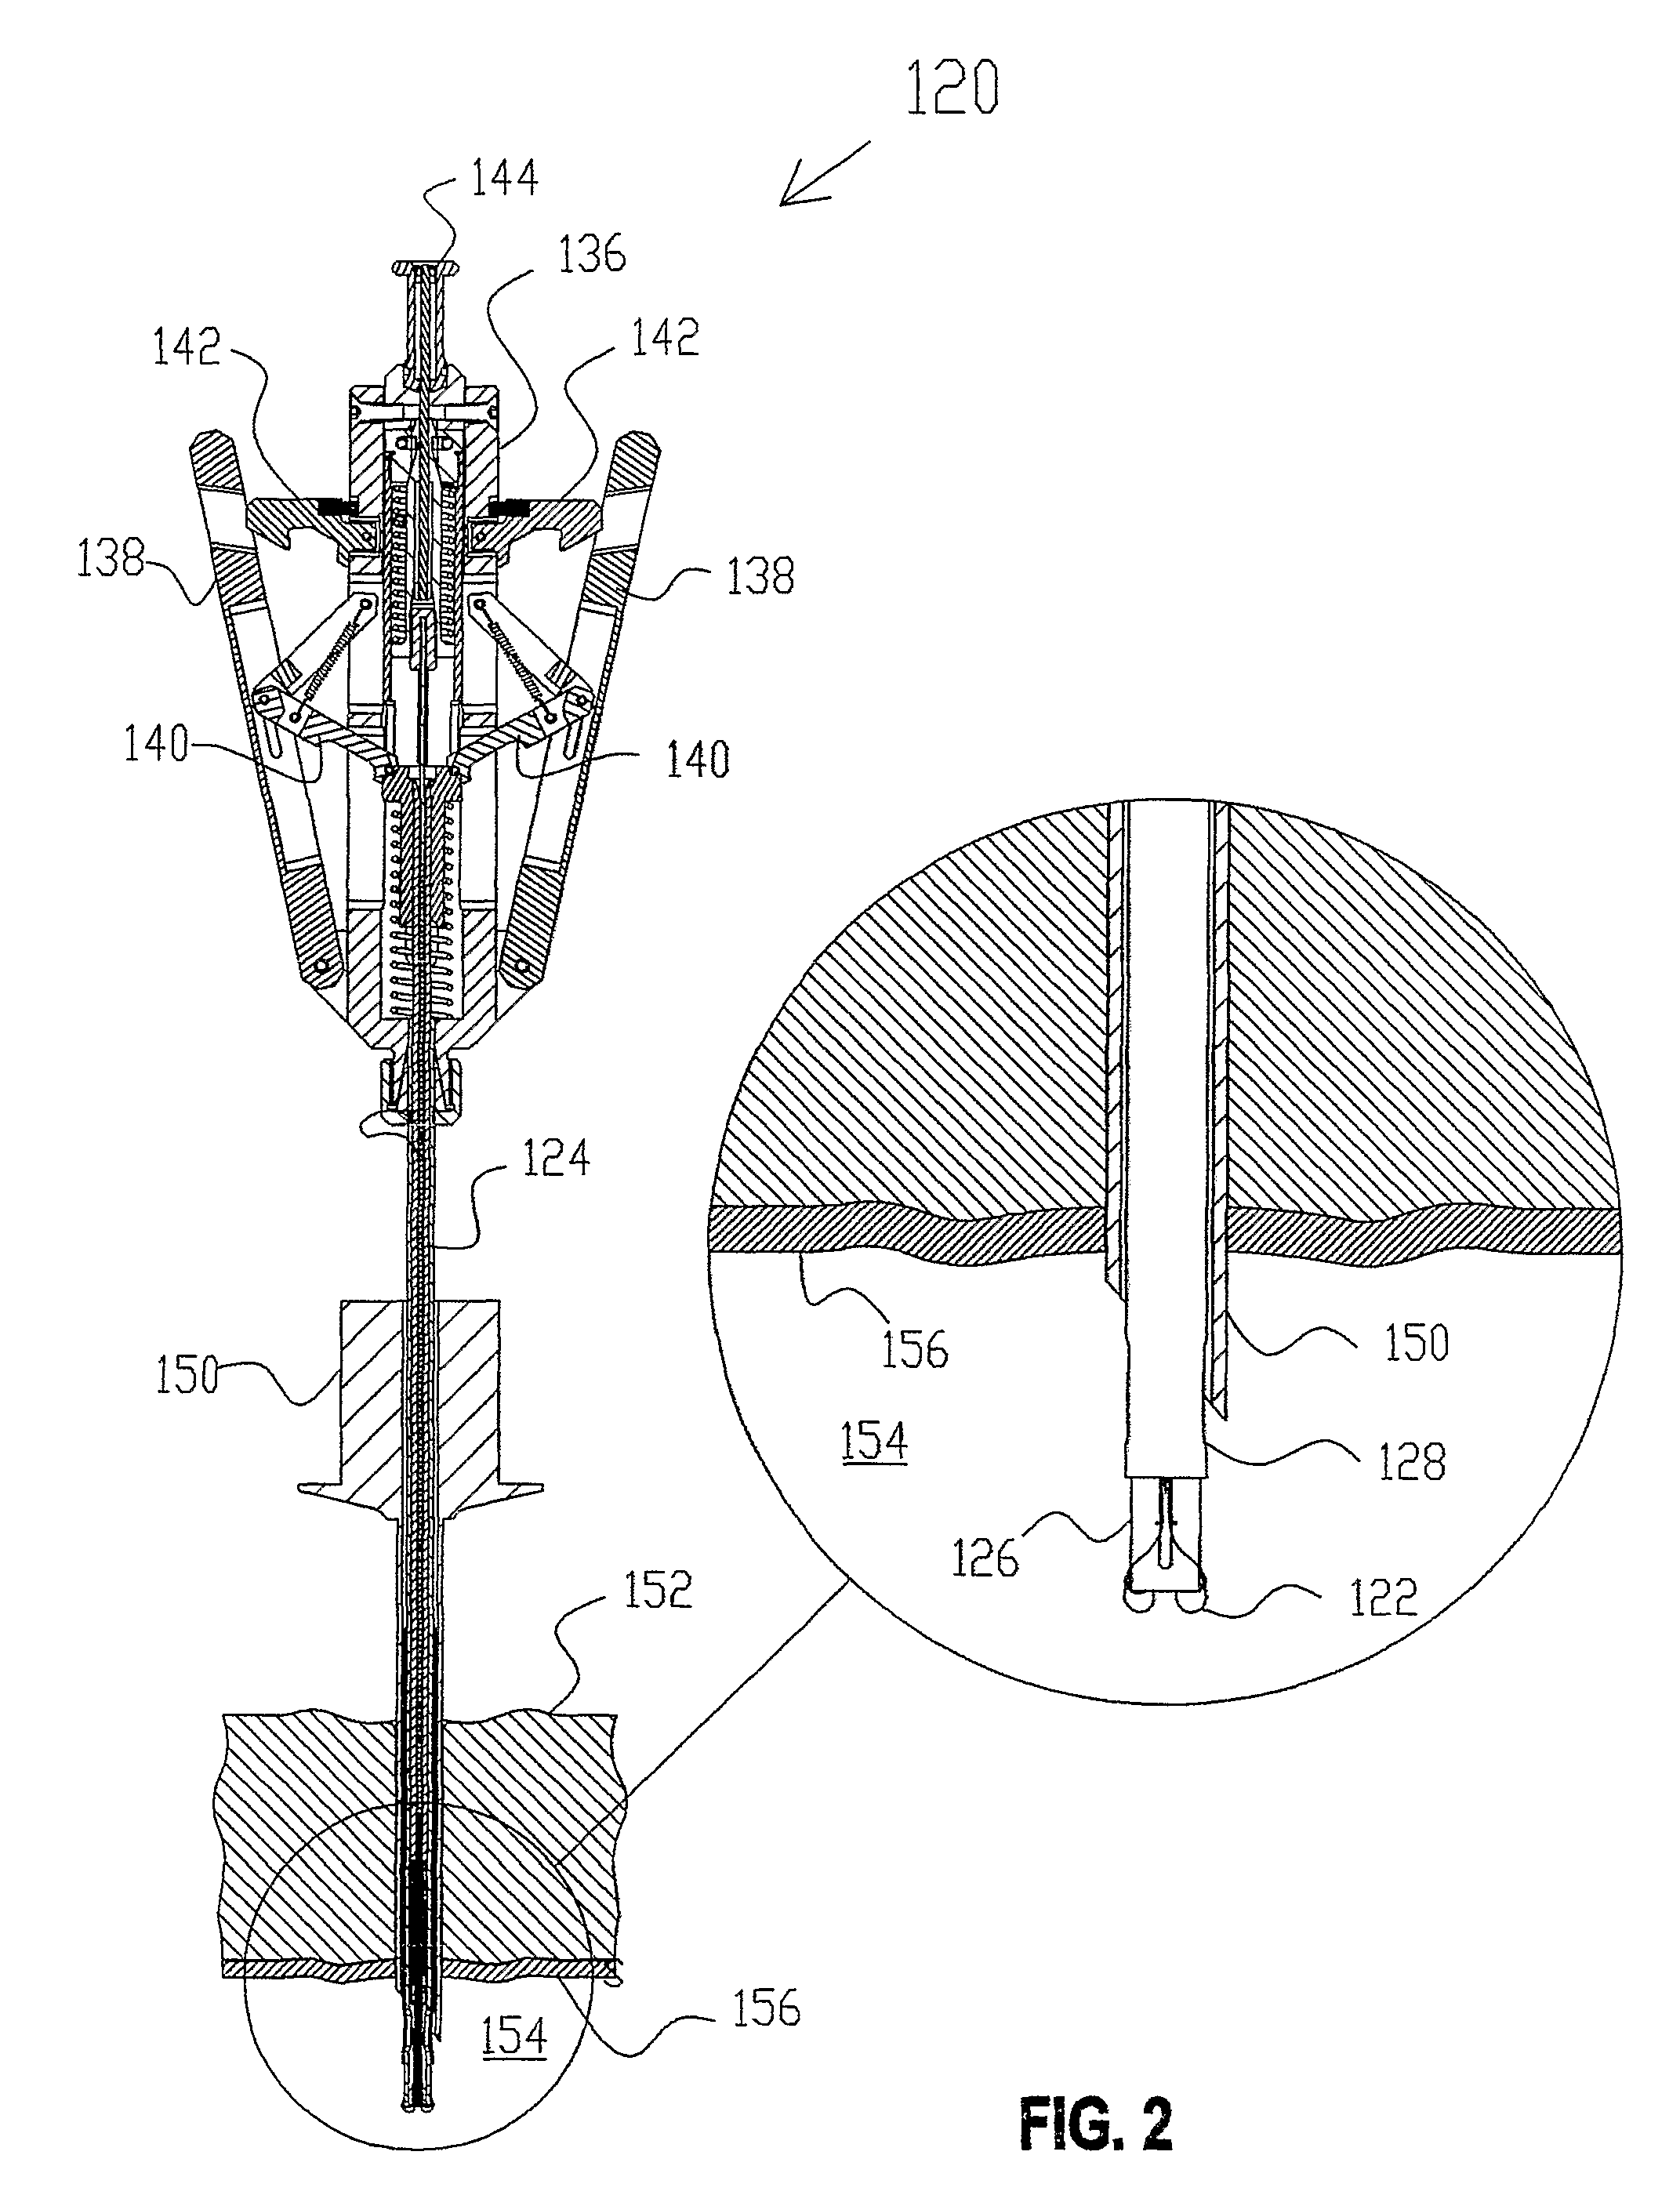 Suture device with first and second needle giudes attached to a shaft and respectively holding first and second needles